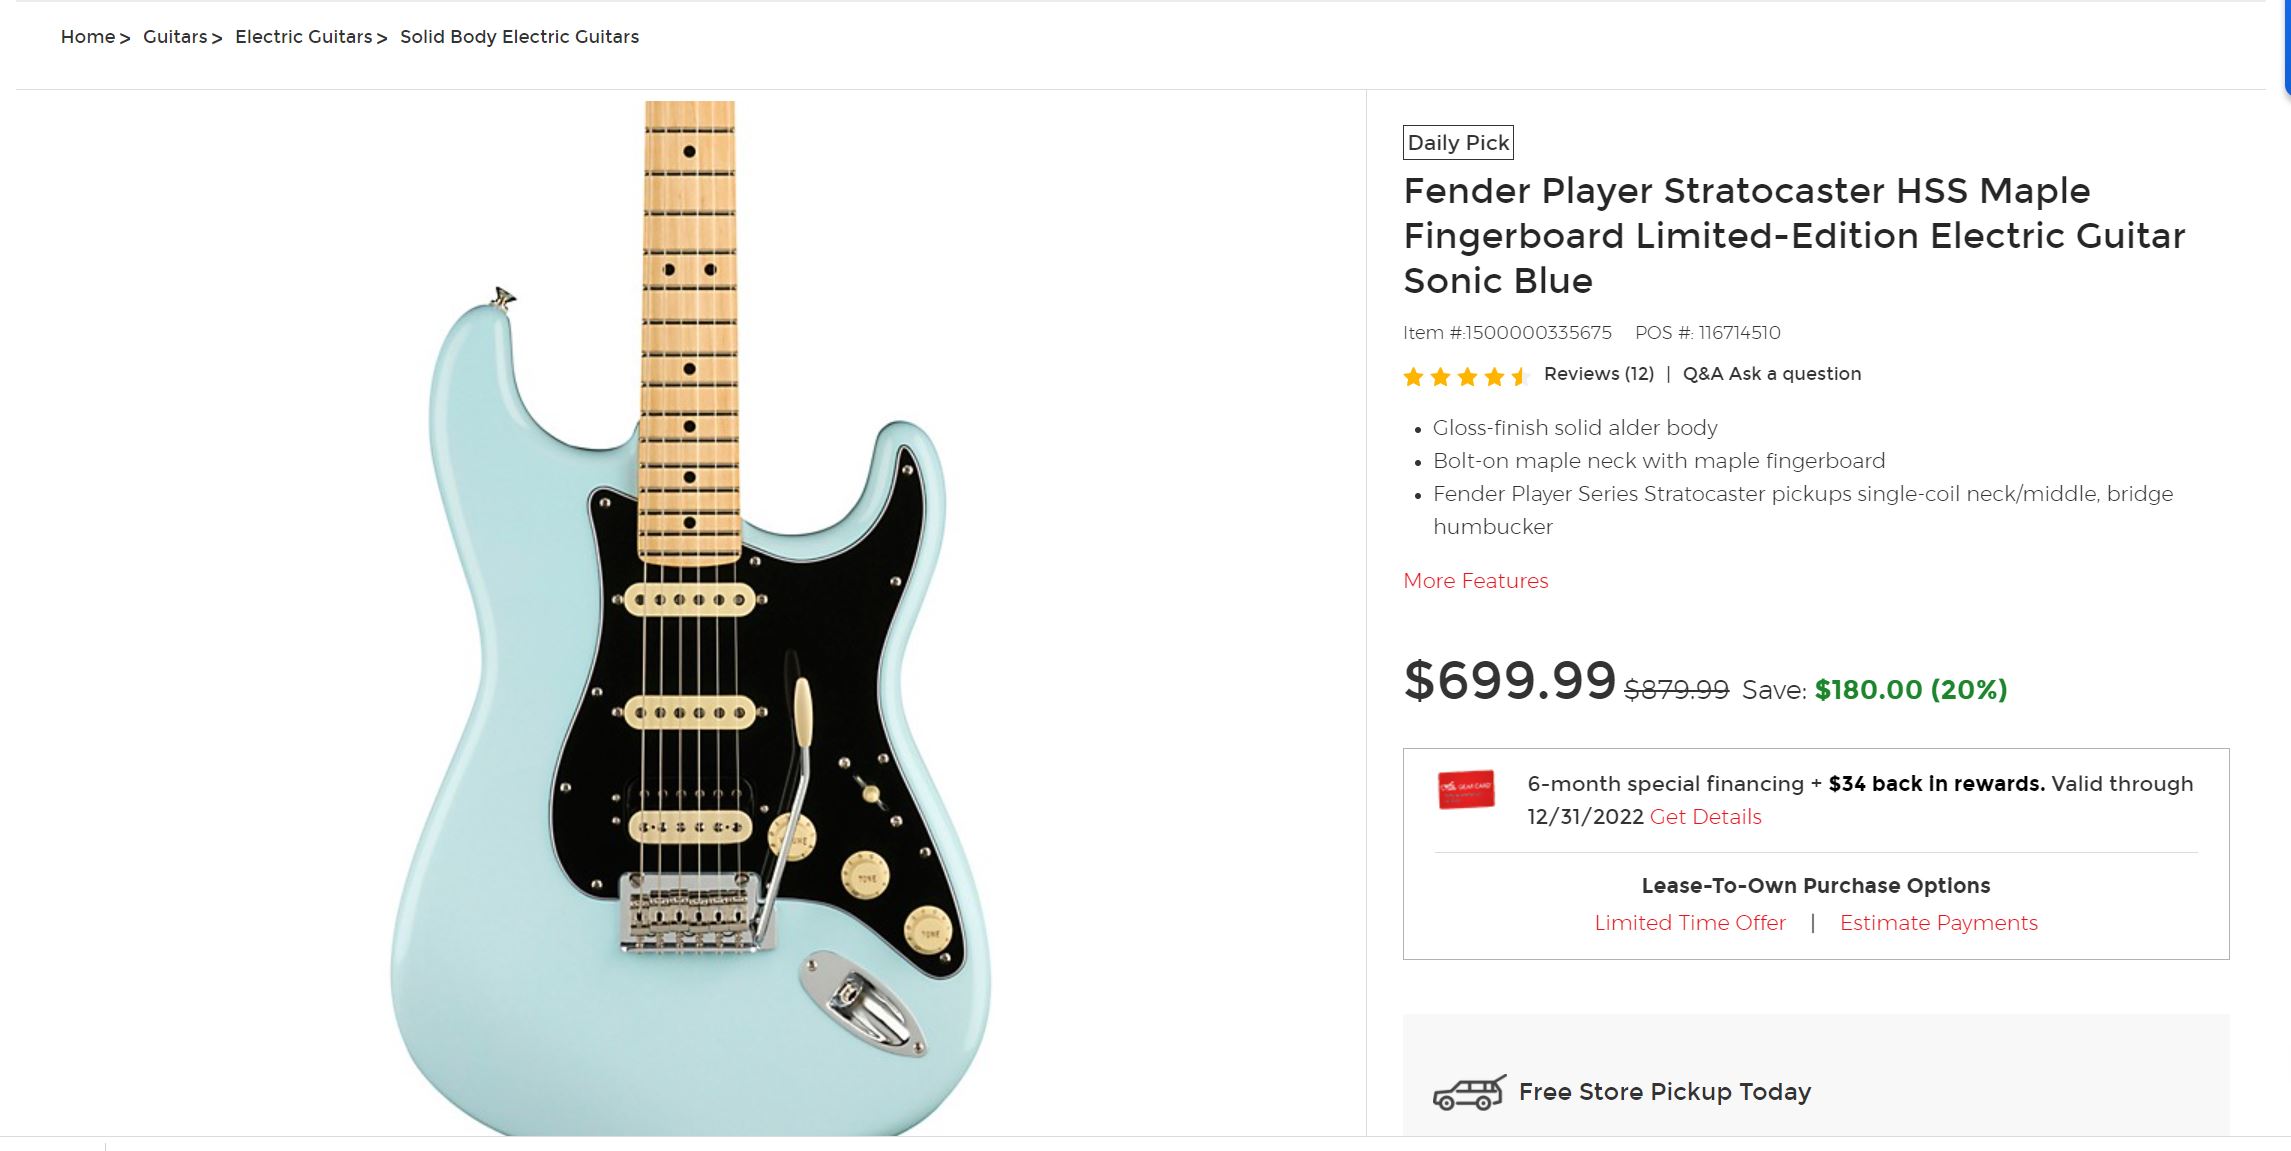 Fender Player Stratocaster HSS Maple Fingerboard Limited-Edition Electric Guitar Sonic Blue $699.98